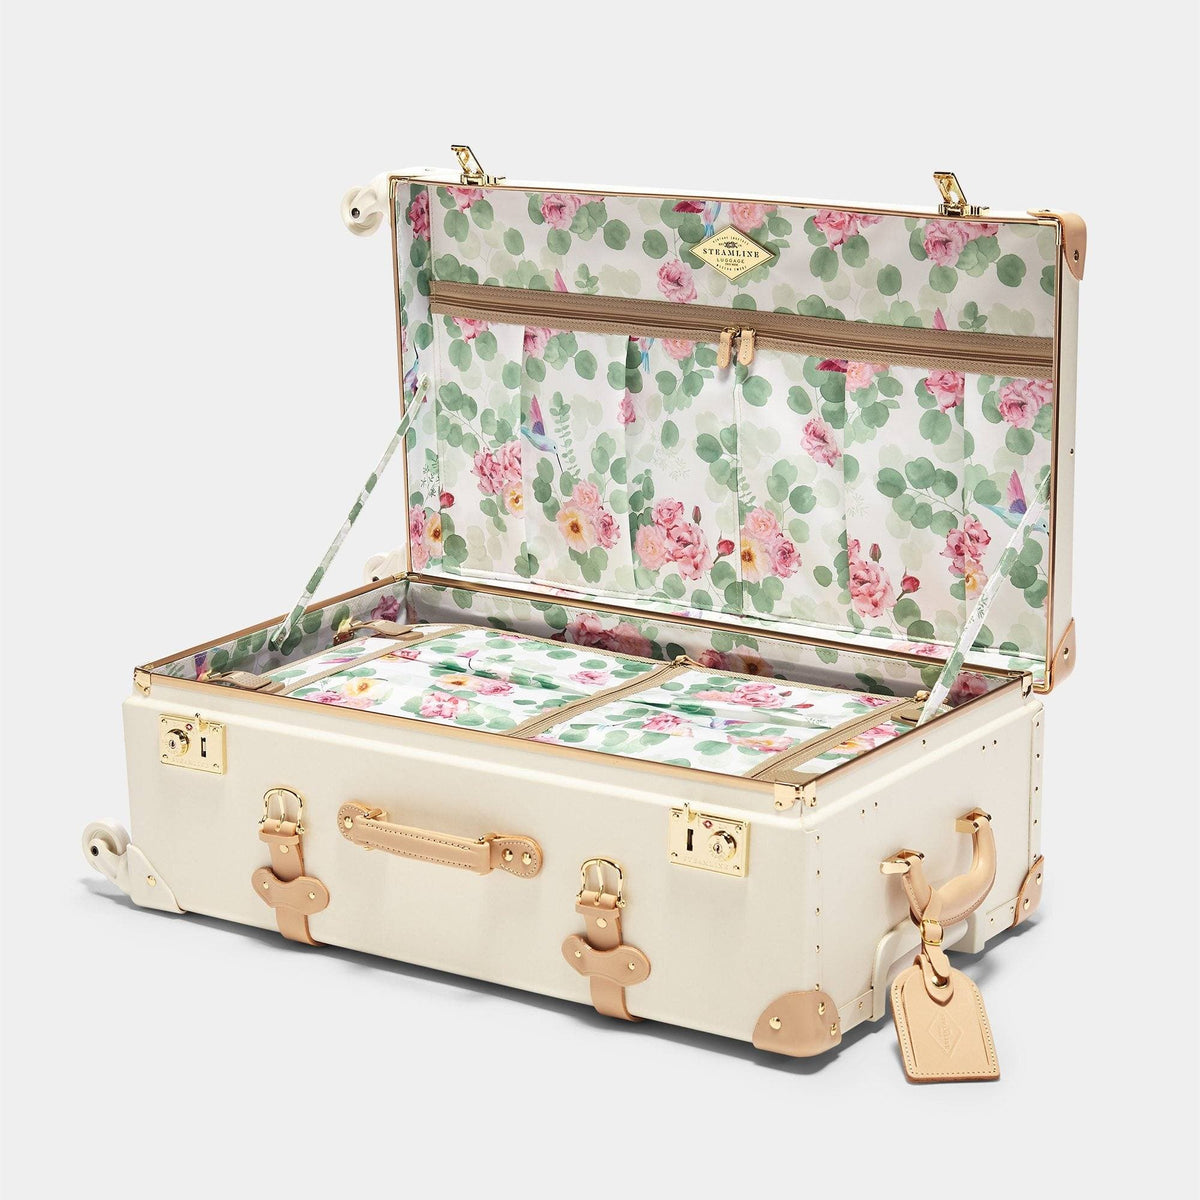 The Sweetheart - Check In Spinner Spinner Steamline Luggage 